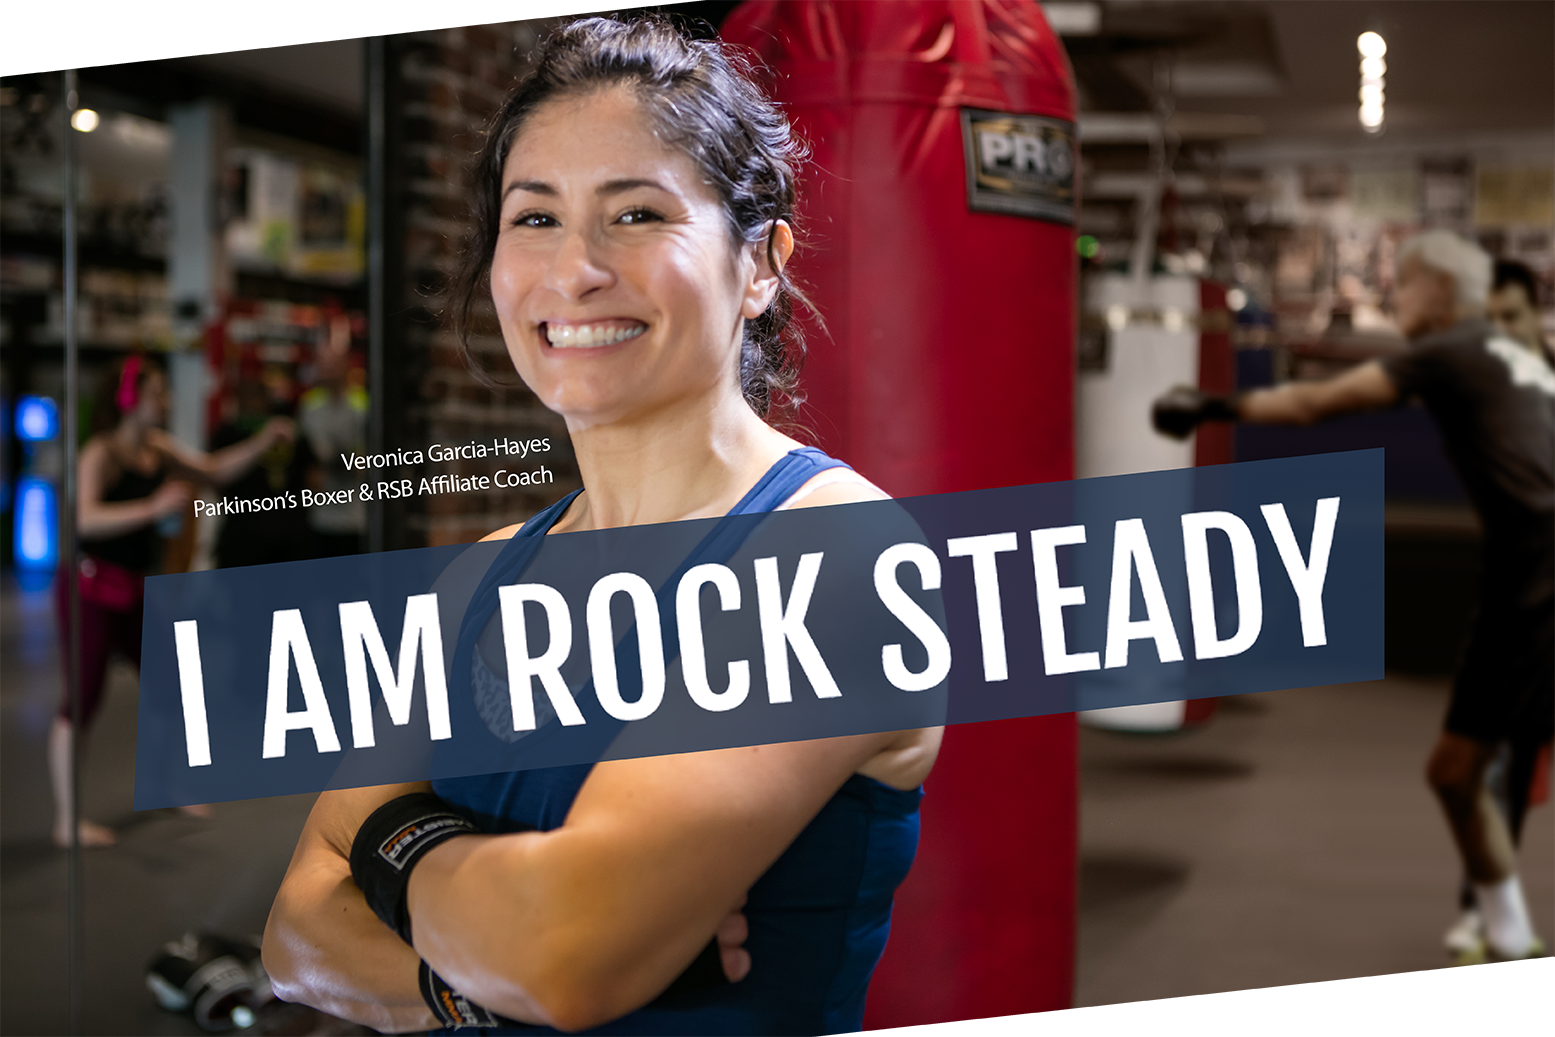 BIG NEWS! Rock Steady Boxing for Parkinson’s is coming to Abbotsford in April 2019.